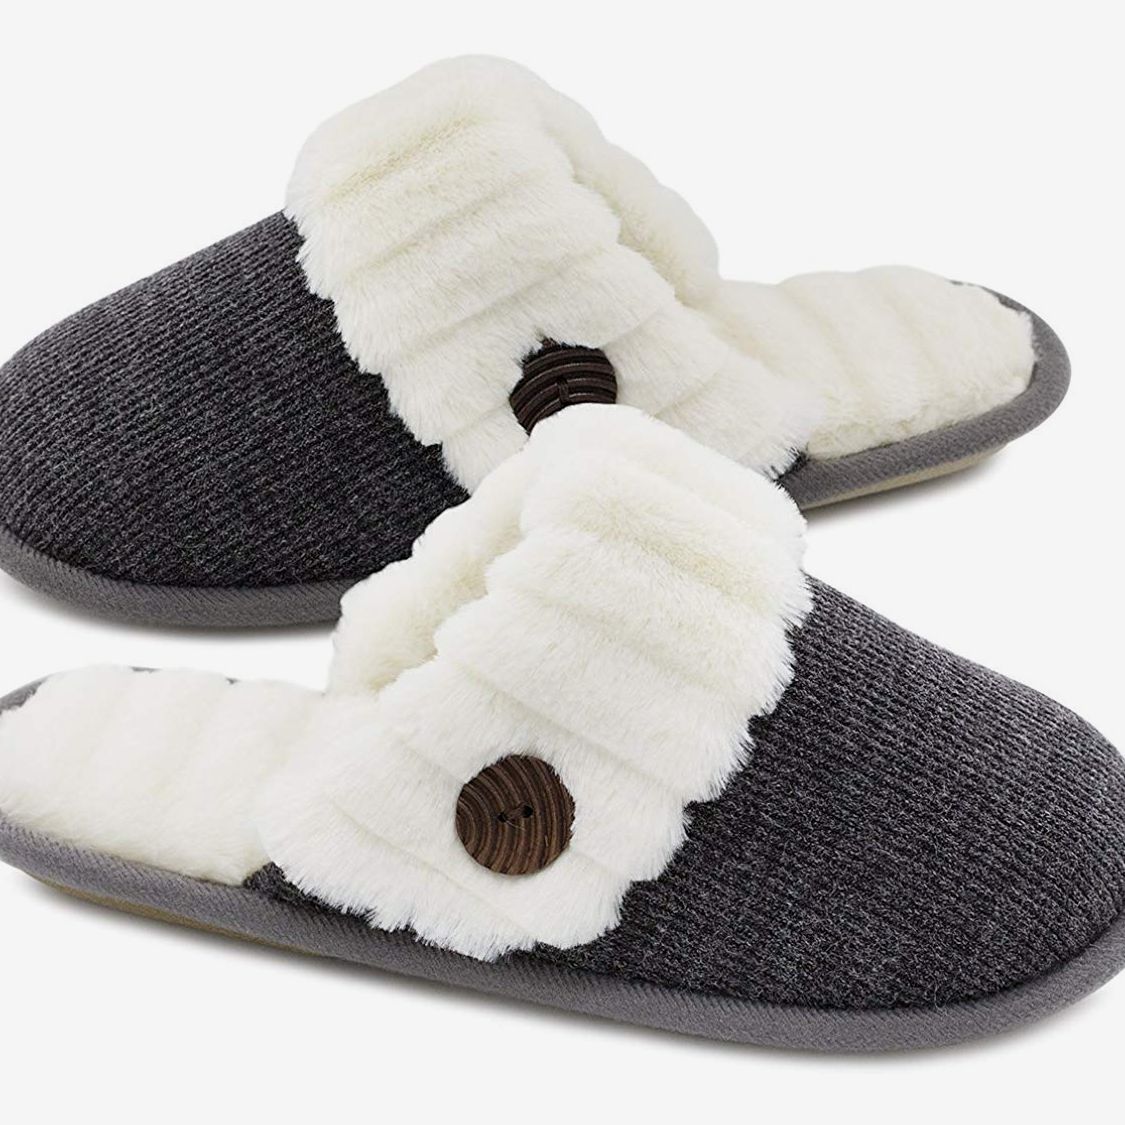 Ladies comfy warm slippers choice of design & size  Slumberzzz etc NEW